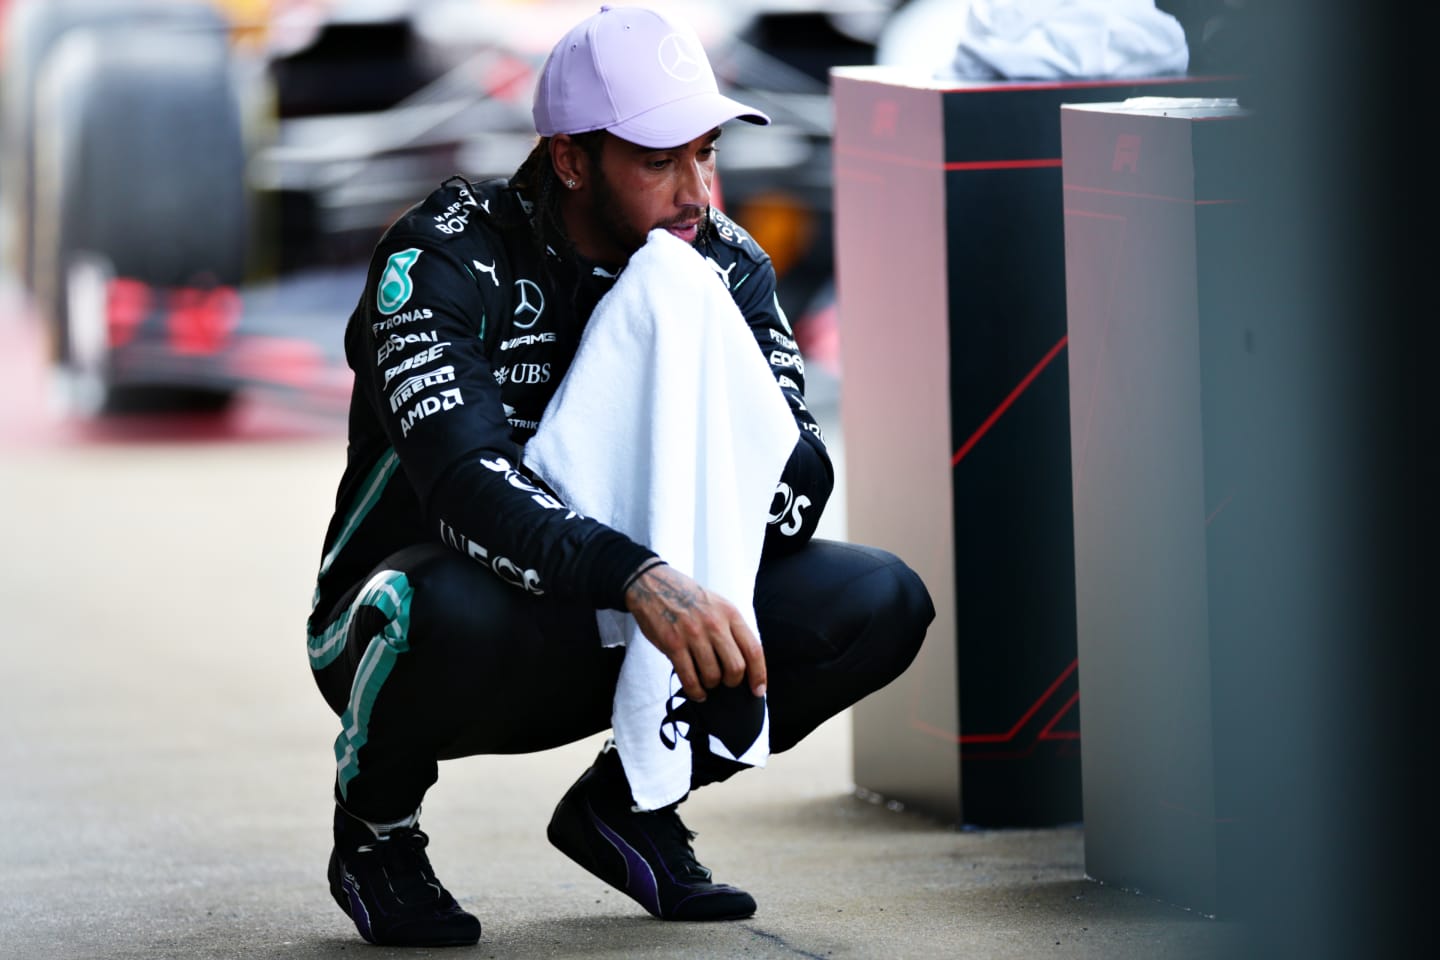 BARCELONA, SPAIN - AUGUST 16: Race winner Lewis Hamilton of Great Britain and Mercedes GP reacts in parc ferme during the F1 Grand Prix of Spain at Circuit de Barcelona-Catalunya on August 16, 2020 in Barcelona, Spain. (Photo by Peter Fox/Getty Images)